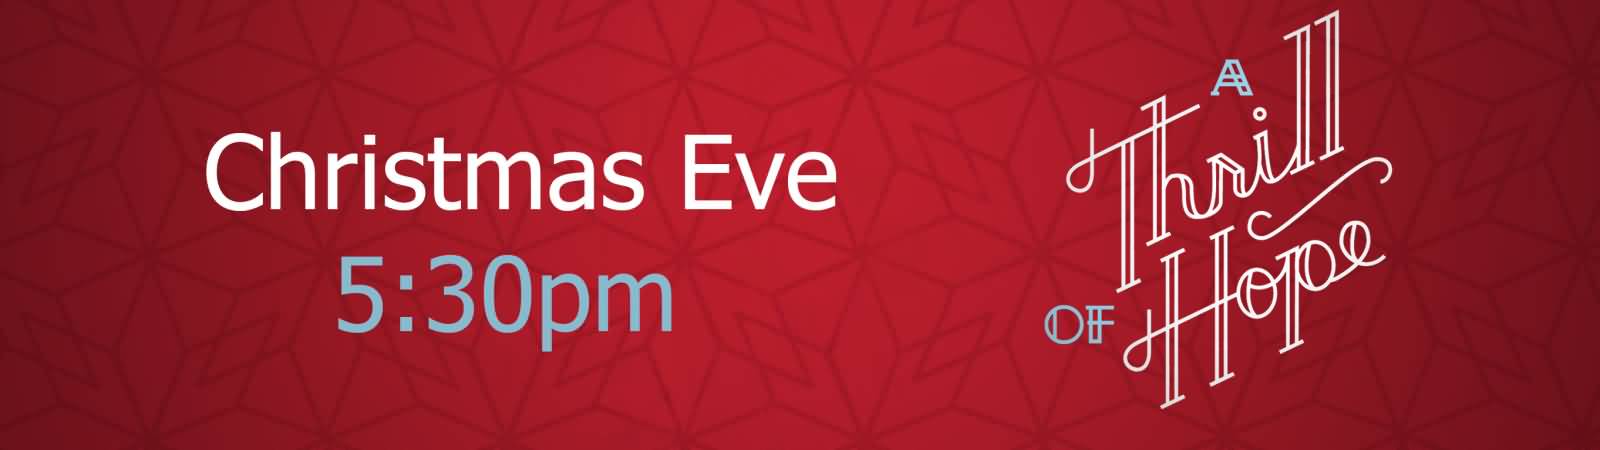 Christmas Eve A Thrill Of Hope Header Image